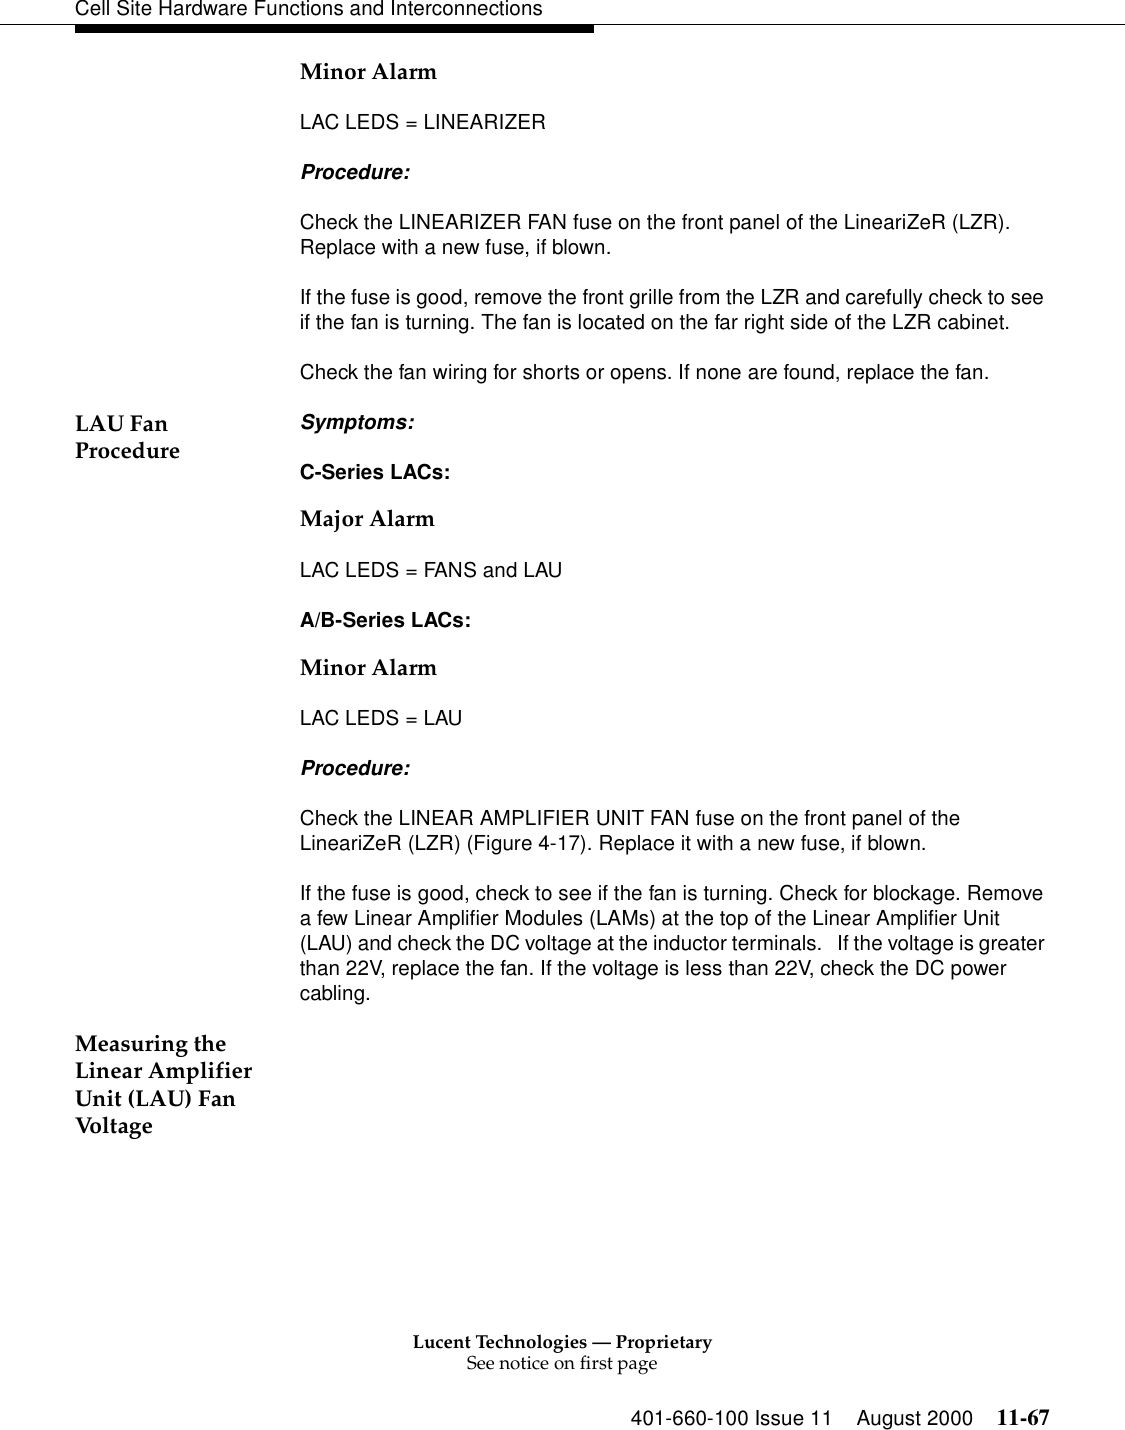 Lucent Technologies — ProprietarySee notice on first page401-660-100 Issue 11 August 2000 11-67Cell Site Hardware Functions and InterconnectionsMinor Alarm LAC LEDS = LINEARIZER Procedure: Check the LINEARIZER FAN fuse on the front panel of the LineariZeR (LZR). Replace with a new fuse, if blown. If the fuse is good, remove the front grille from the LZR and carefully check to see if the fan is turning. The fan is located on the far right side of the LZR cabinet. Check the fan wiring for shorts or opens. If none are found, replace the fan. LAU Fan Procedure Symptoms: C-Series LACs: Major Alarm LAC LEDS = FANS and LAU A/B-Series LACs: Minor Alarm LAC LEDS = LAU Procedure: Check the LINEAR AMPLIFIER UNIT FAN fuse on the front panel of the LineariZeR (LZR) (Figure 4-17). Replace it with a new fuse, if blown. If the fuse is good, check to see if the fan is turning. Check for blockage. Remove a few Linear Amplifier Modules (LAMs) at the top of the Linear Amplifier Unit (LAU) and check the DC voltage at the inductor terminals.   If the voltage is greater than 22V, replace the fan. If the voltage is less than 22V, check the DC power cabling. Measuring the Linear Amplifier Unit (LAU) Fan Voltage 